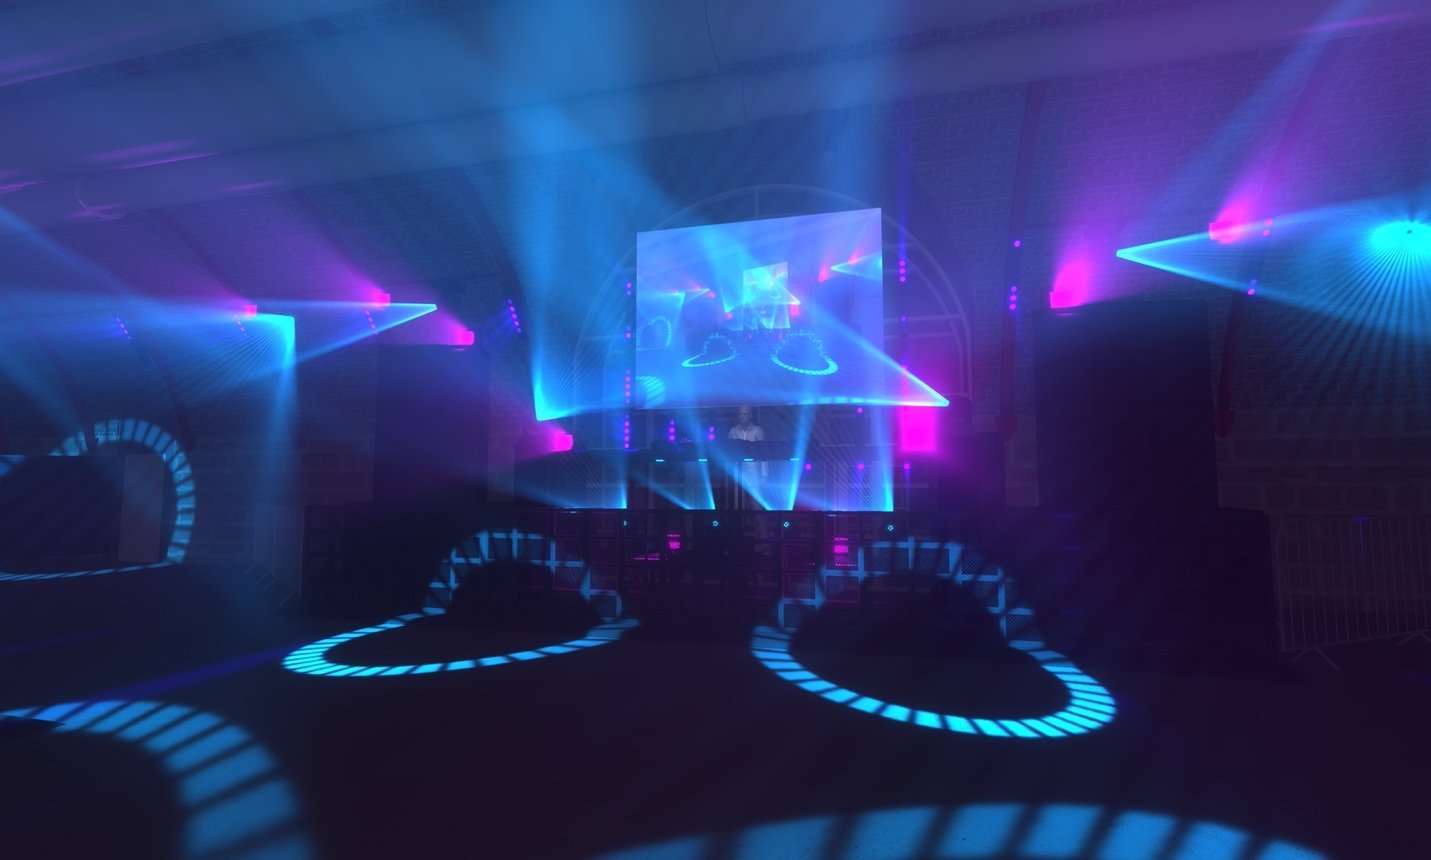 The main stage of the virtual club is lit up in neon blues and purples.